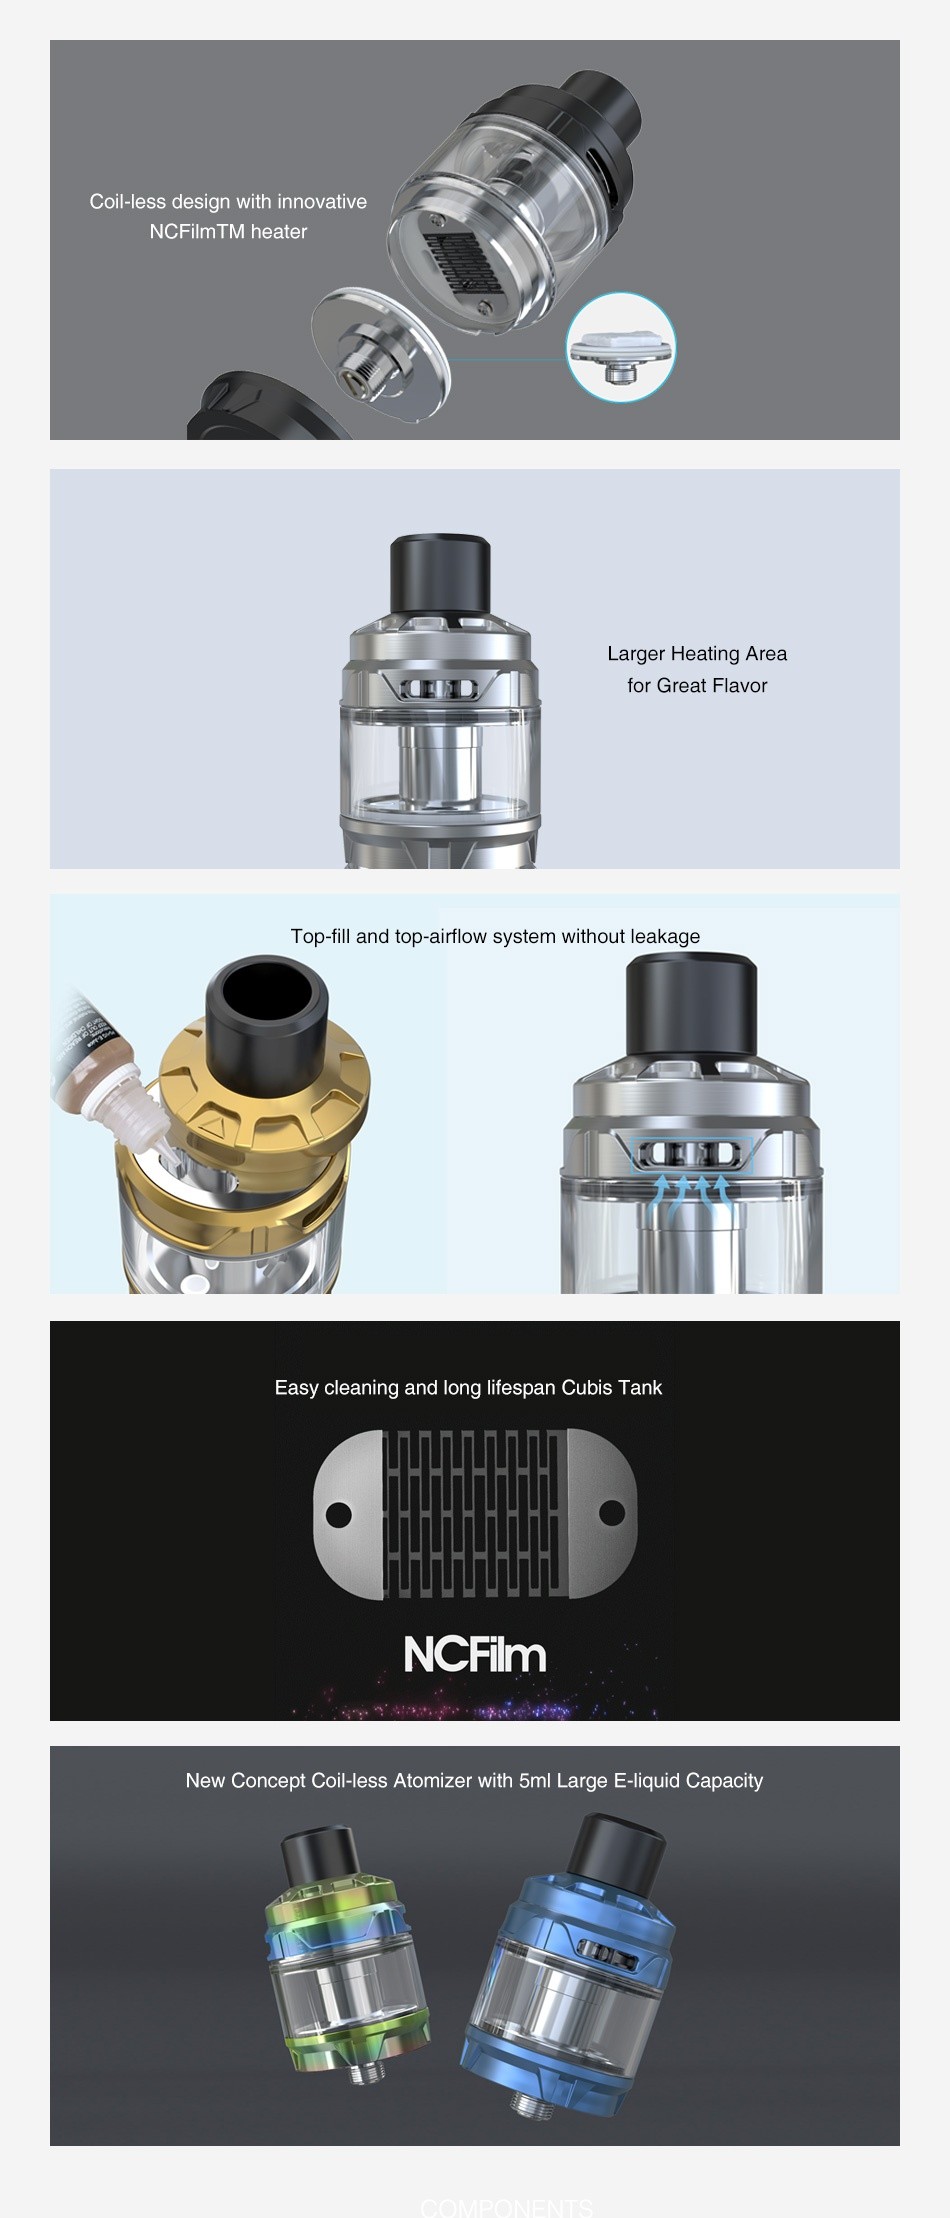 Joyetech Cubis Max Atomizer 5ml Coil less design with innovative NCFilmTM heater Larger Heating Area for great flavor Top fill and top airflow system without leakage Easy cleaning and long lifespan Cubis Tank NCFim New Concept Coil less Atomizer with 5ml Large E liquid Capacity